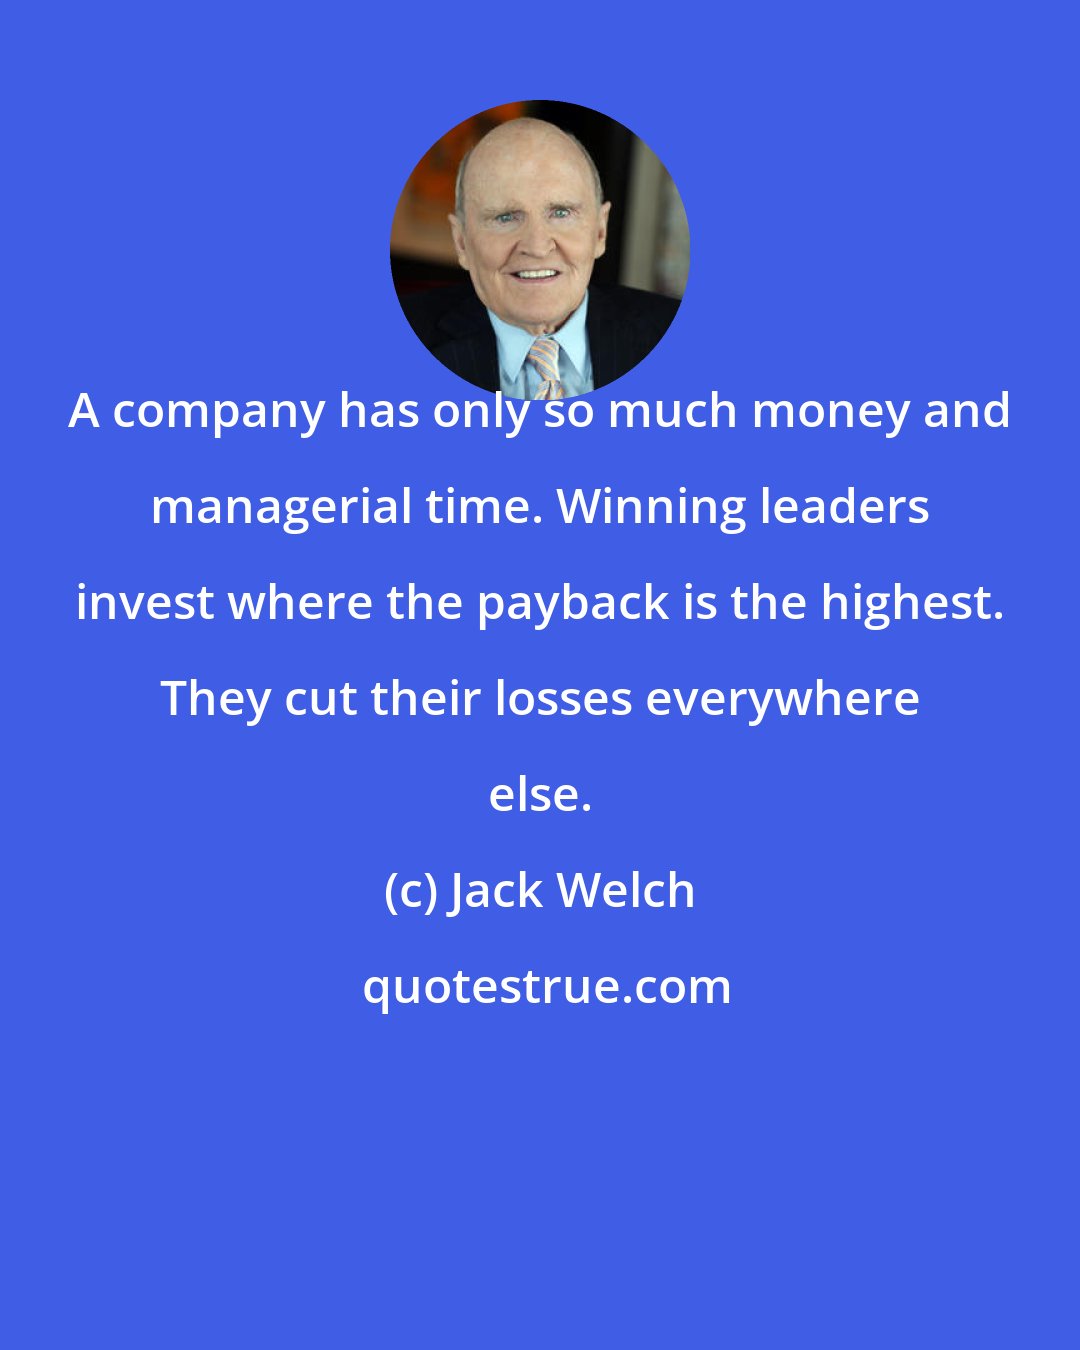 Jack Welch: A company has only so much money and managerial time. Winning leaders invest where the payback is the highest. They cut their losses everywhere else.